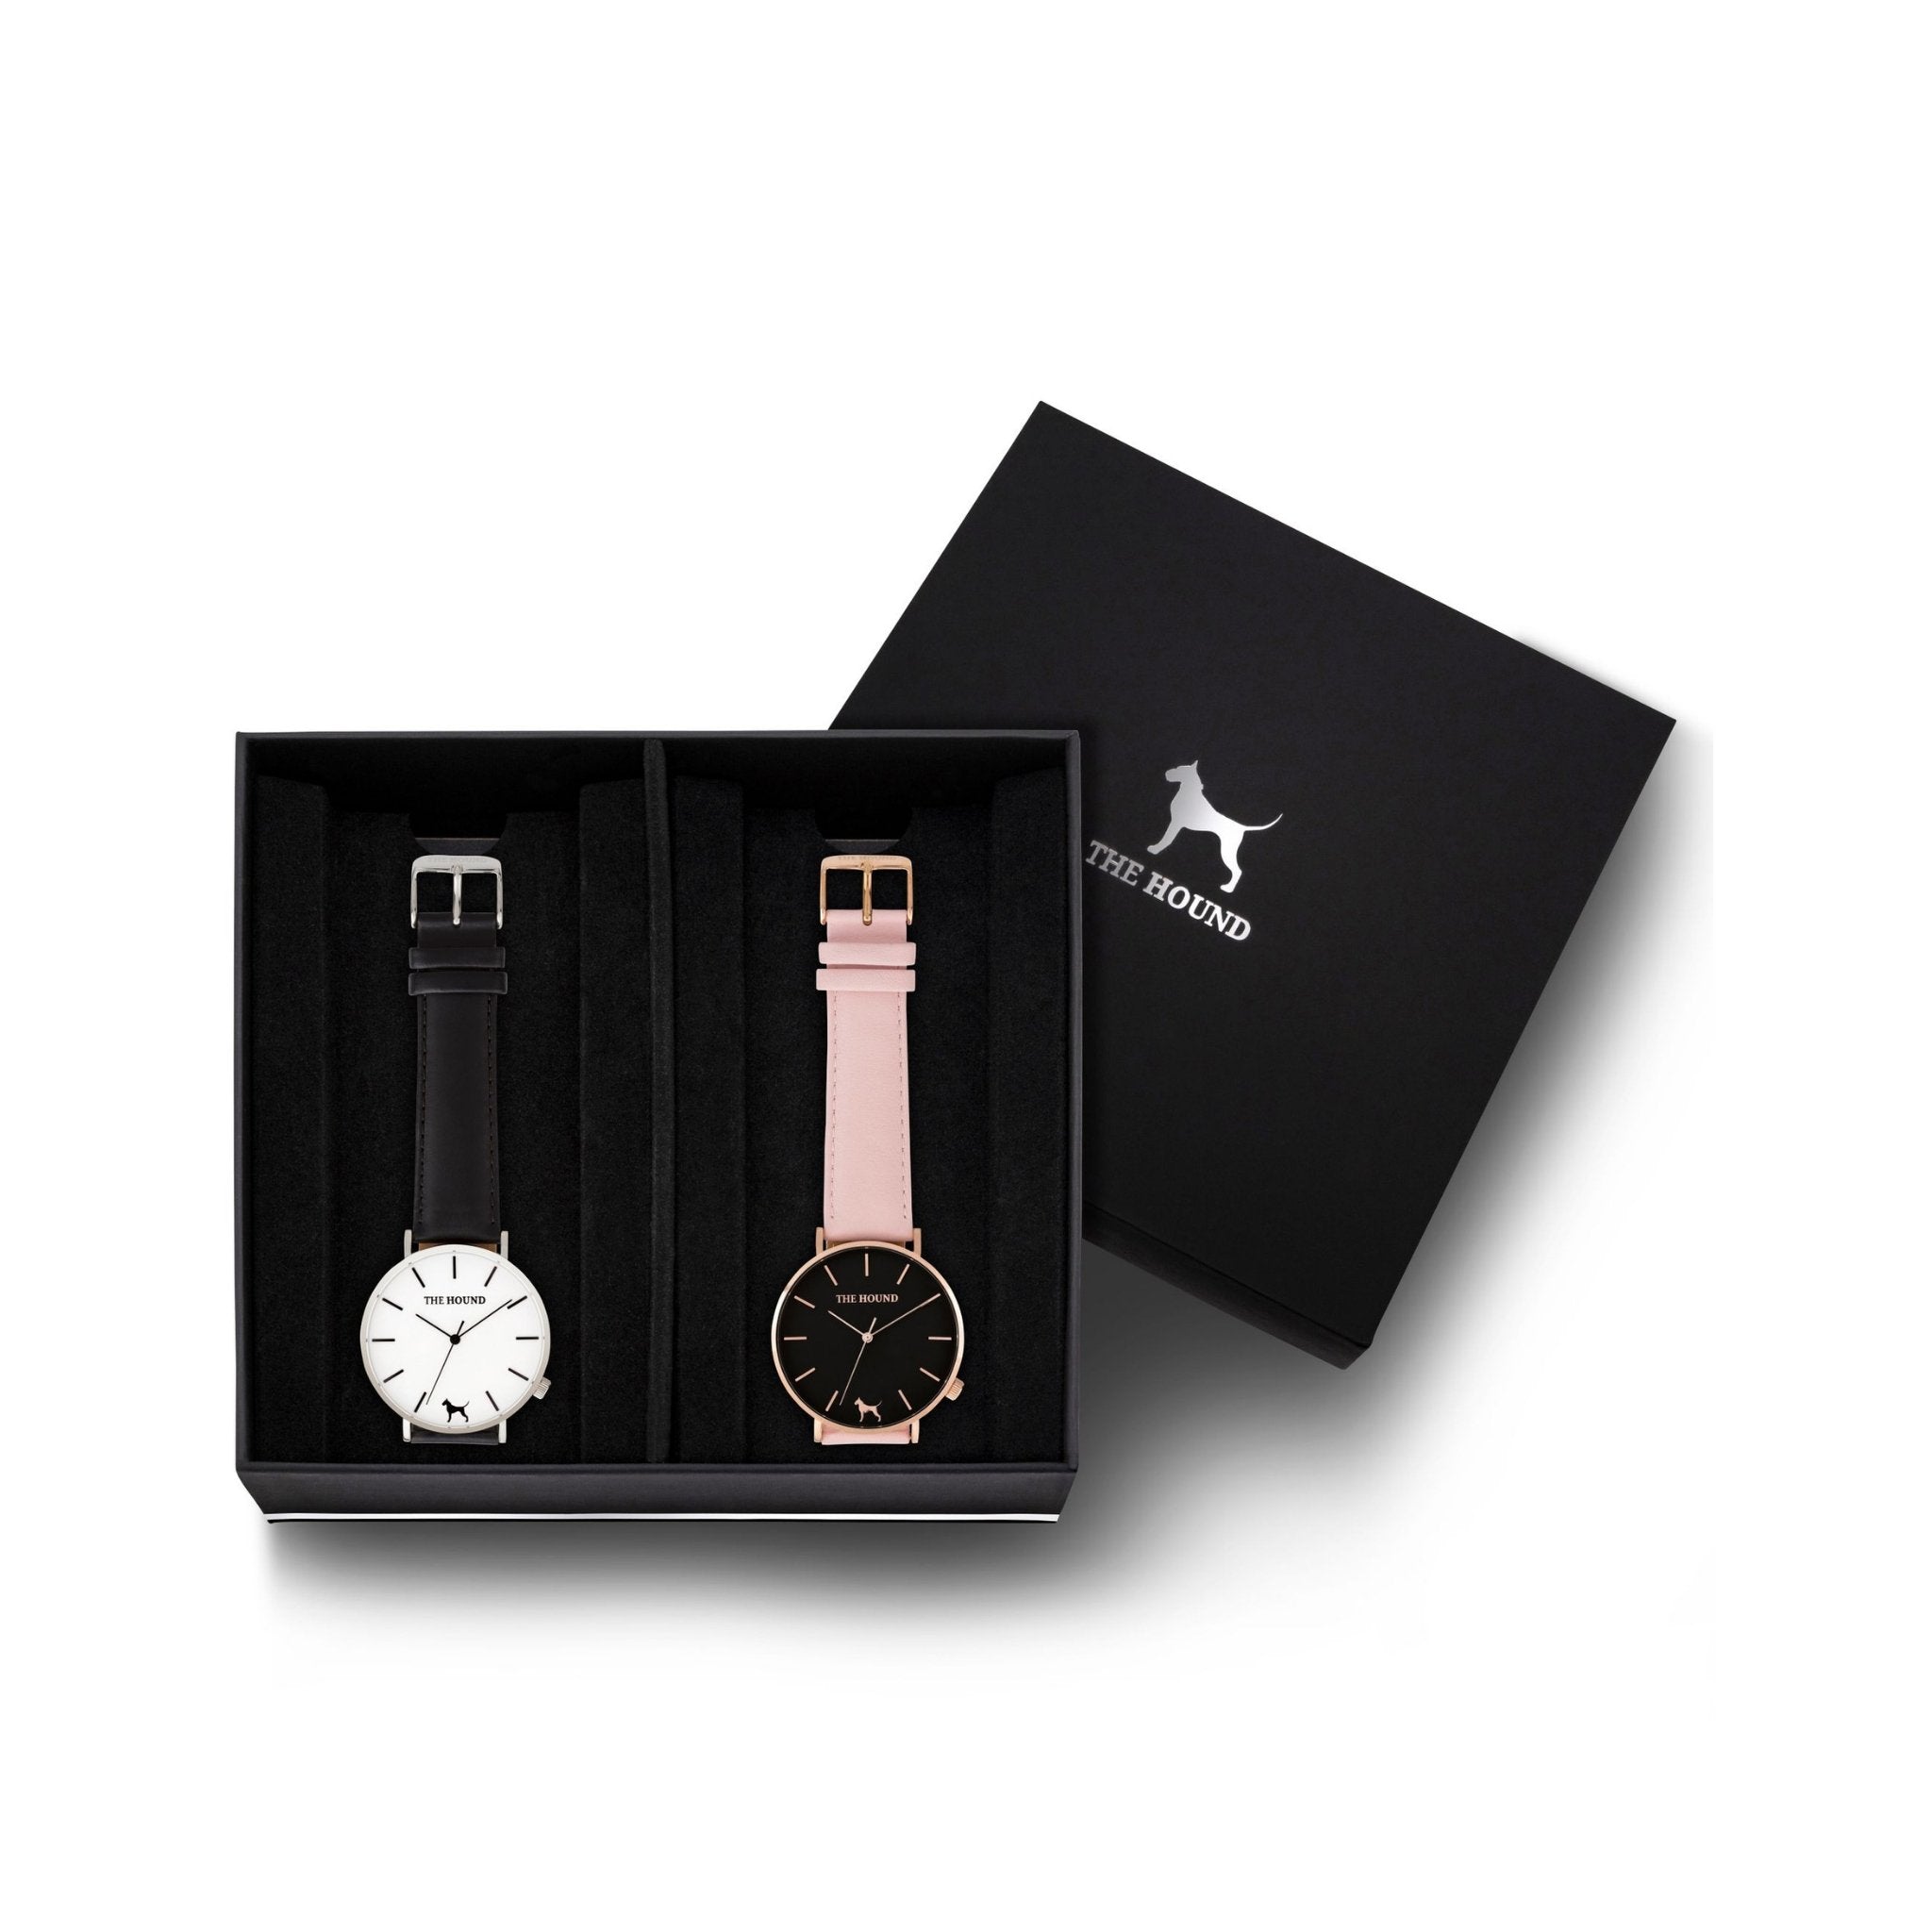 Custom gift set - Silver and white watch with stitched black genuine leather band and a rose gold and black watch with stitched blush pink genuine leather band